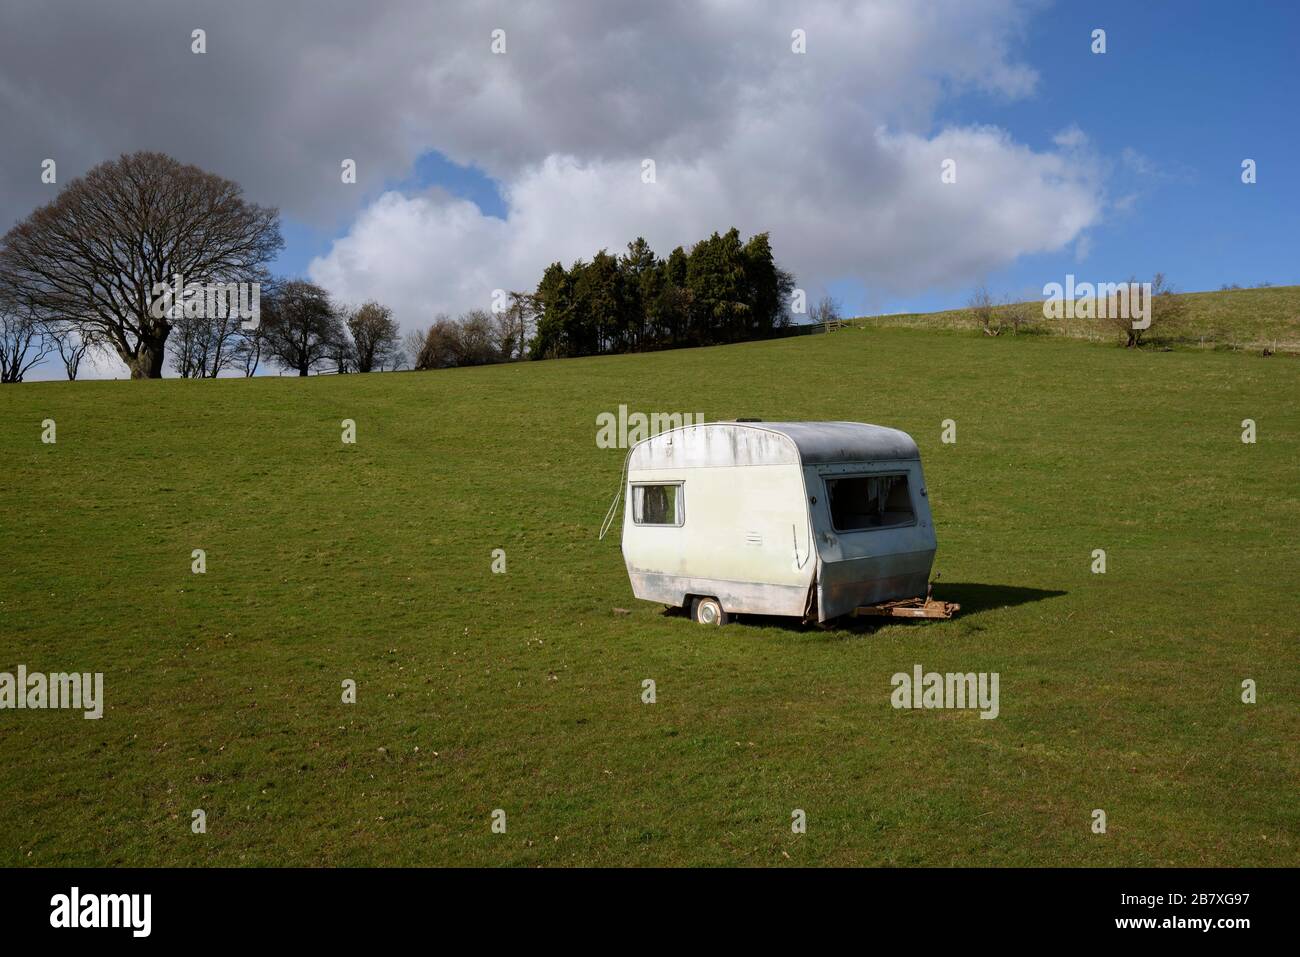 A caravan isolated in a field in Herefordshire. Stock Photo